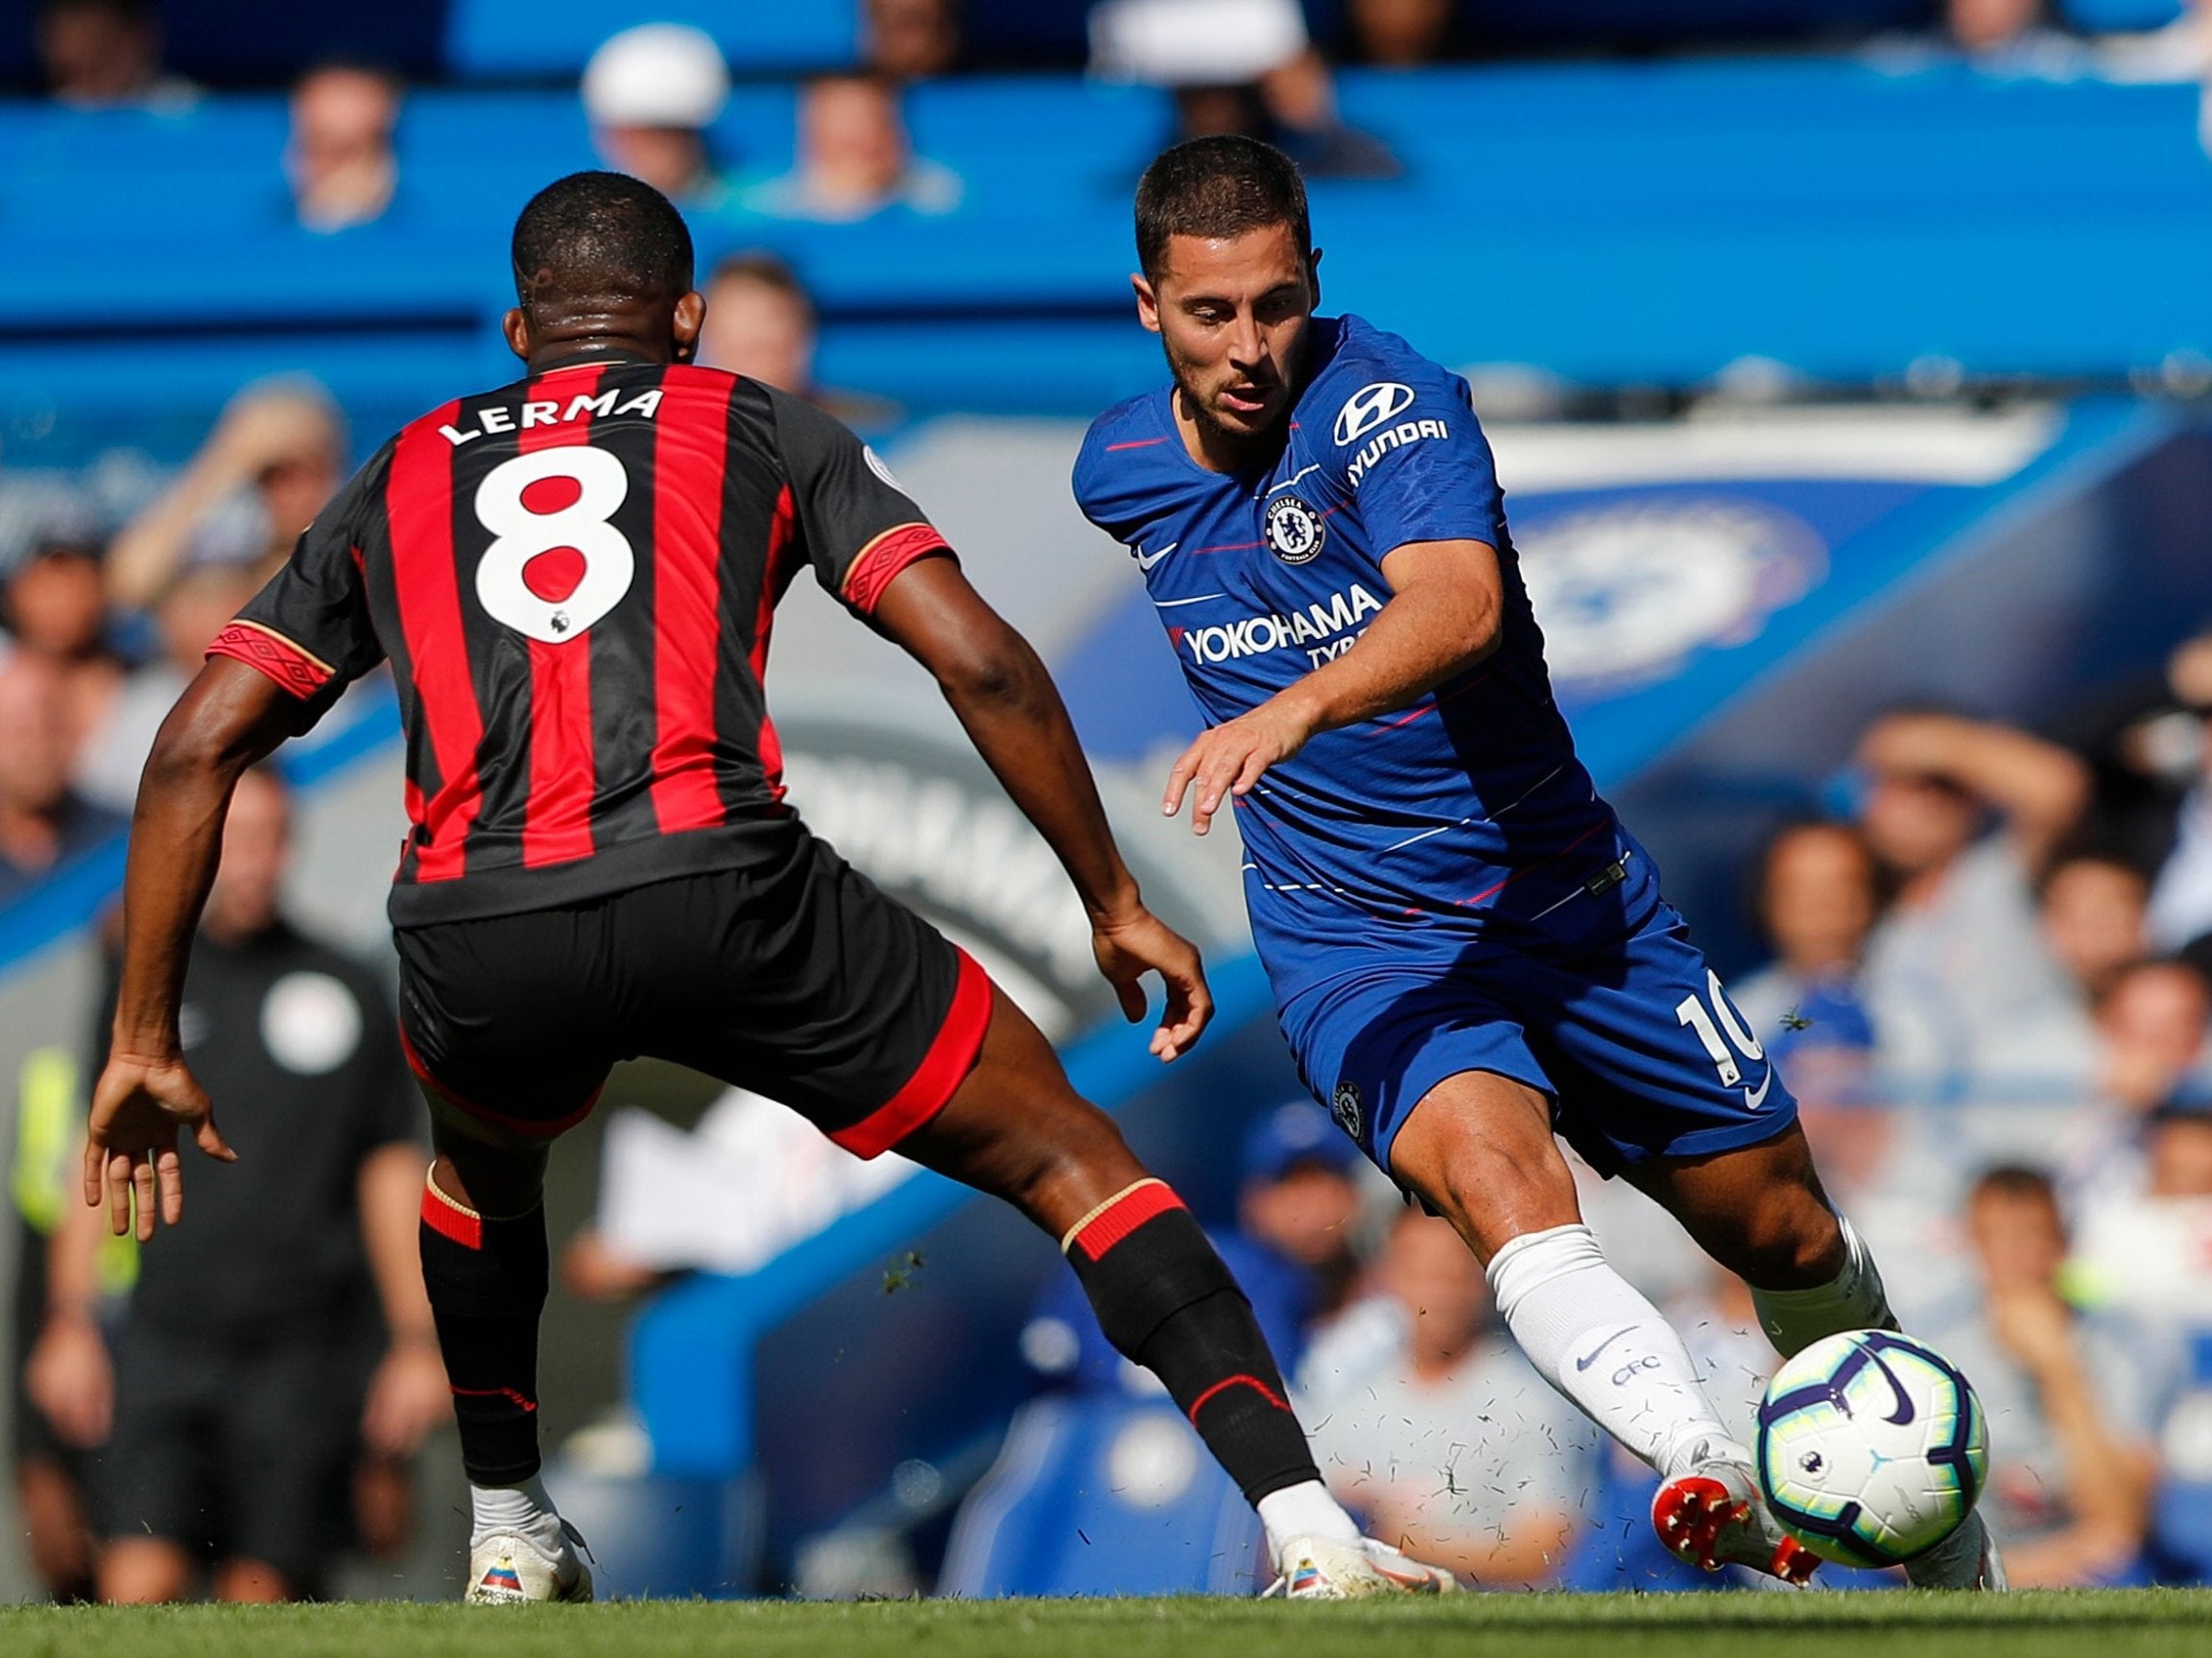 Chelsea vs Bournemouth - LIVE: Score, goals and updates plus latest from the Premier League and predictions, team news, line-ups, odds and more